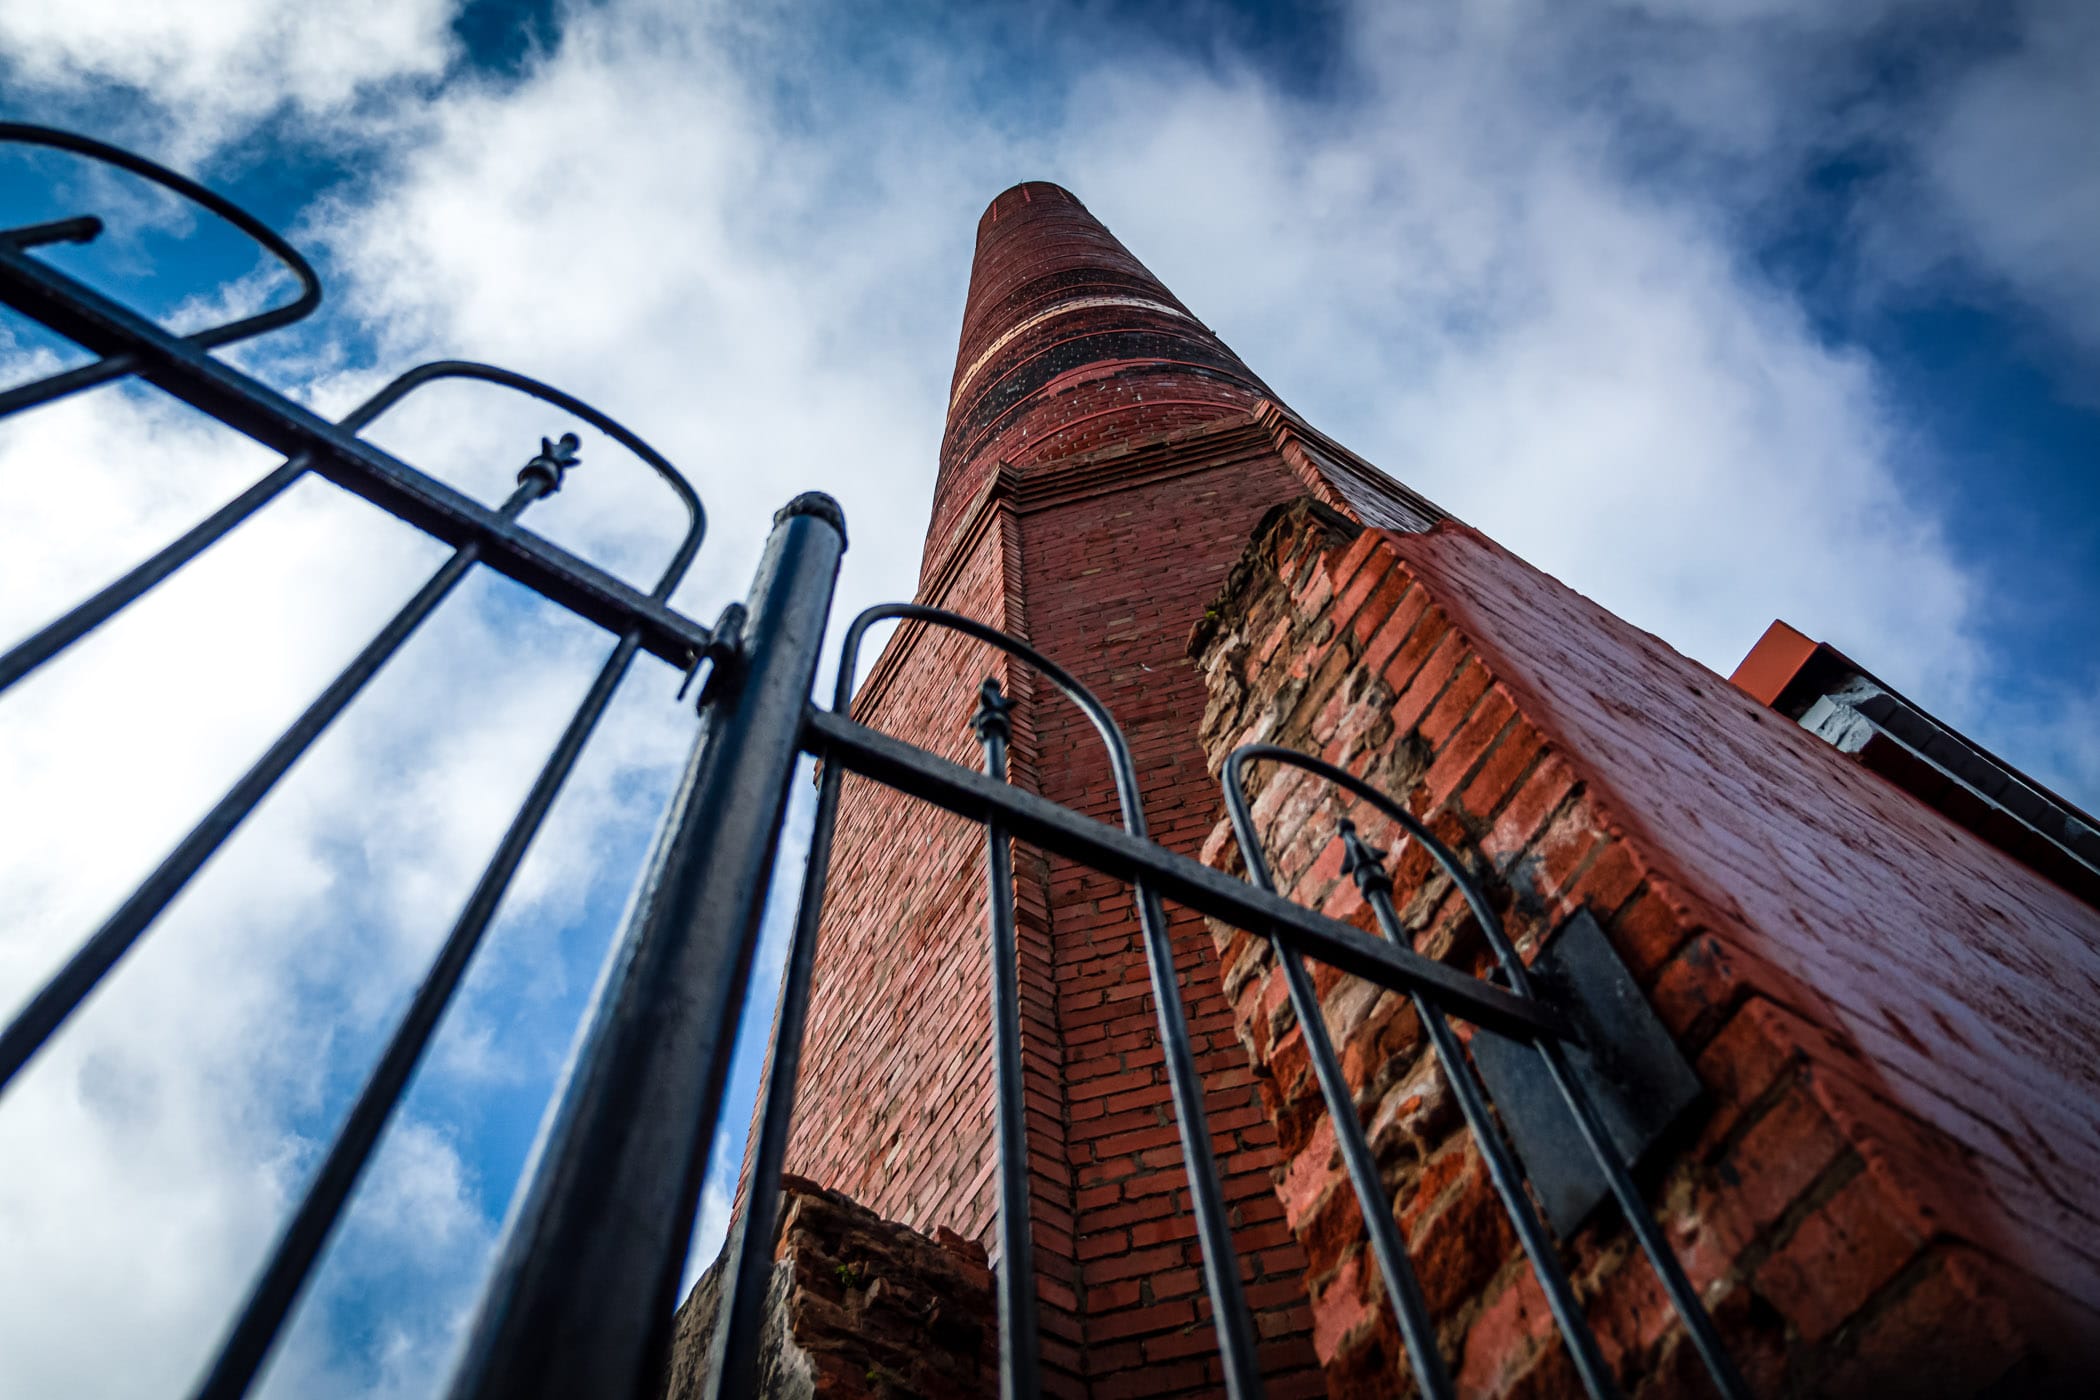 A brick chimney—a relic of a the first ice manufacturing plant in Texas—rises towards the clouds over Downtown Galveston, Texas.